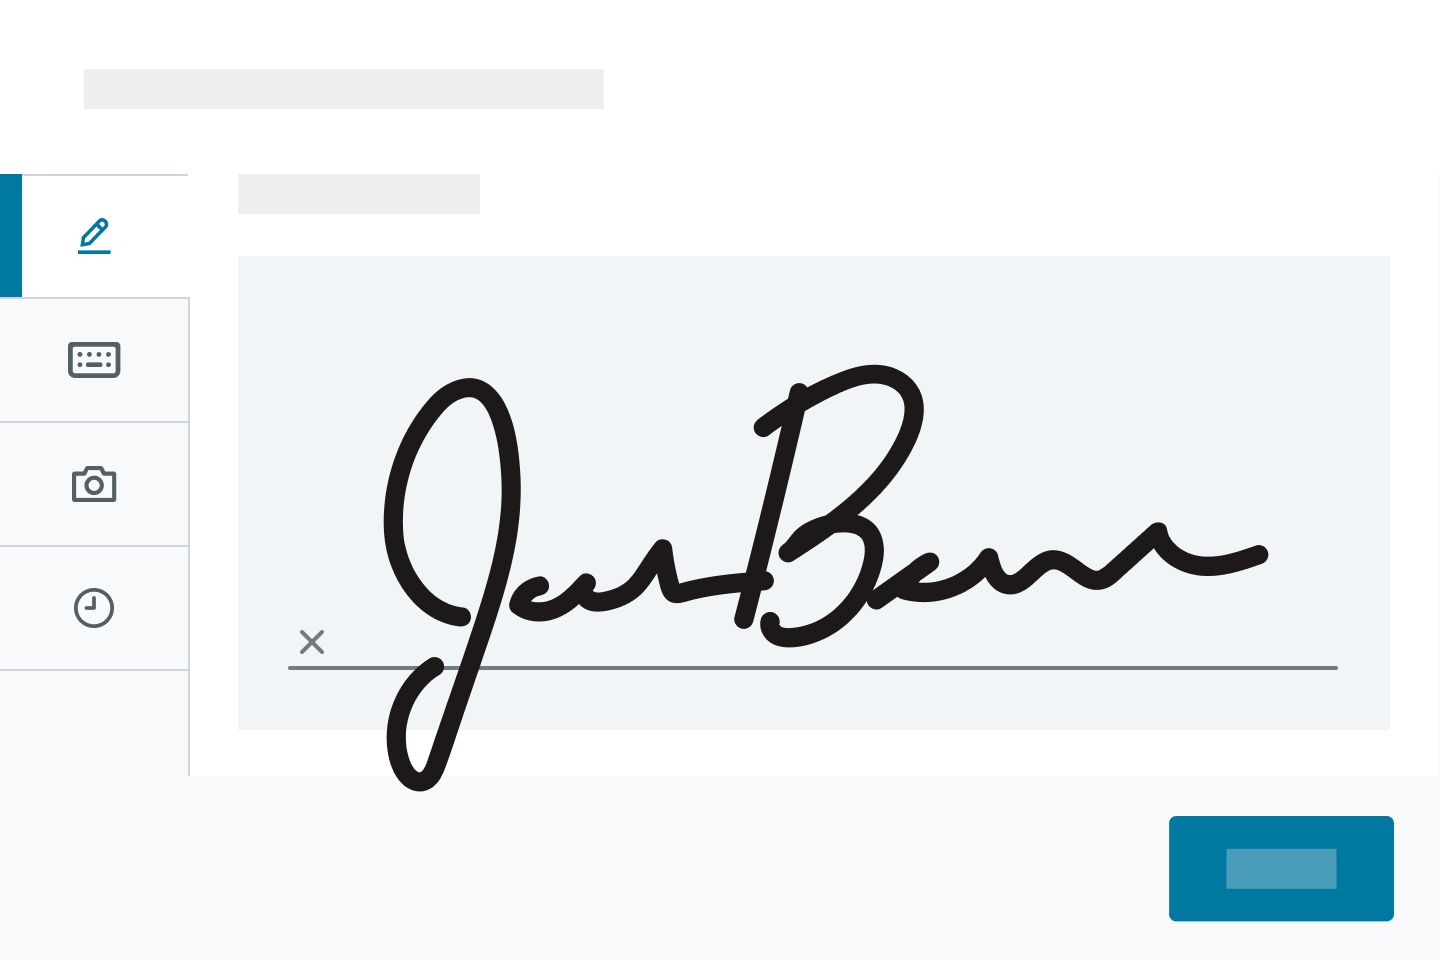 A handwritten electronic signature that has been added to a document